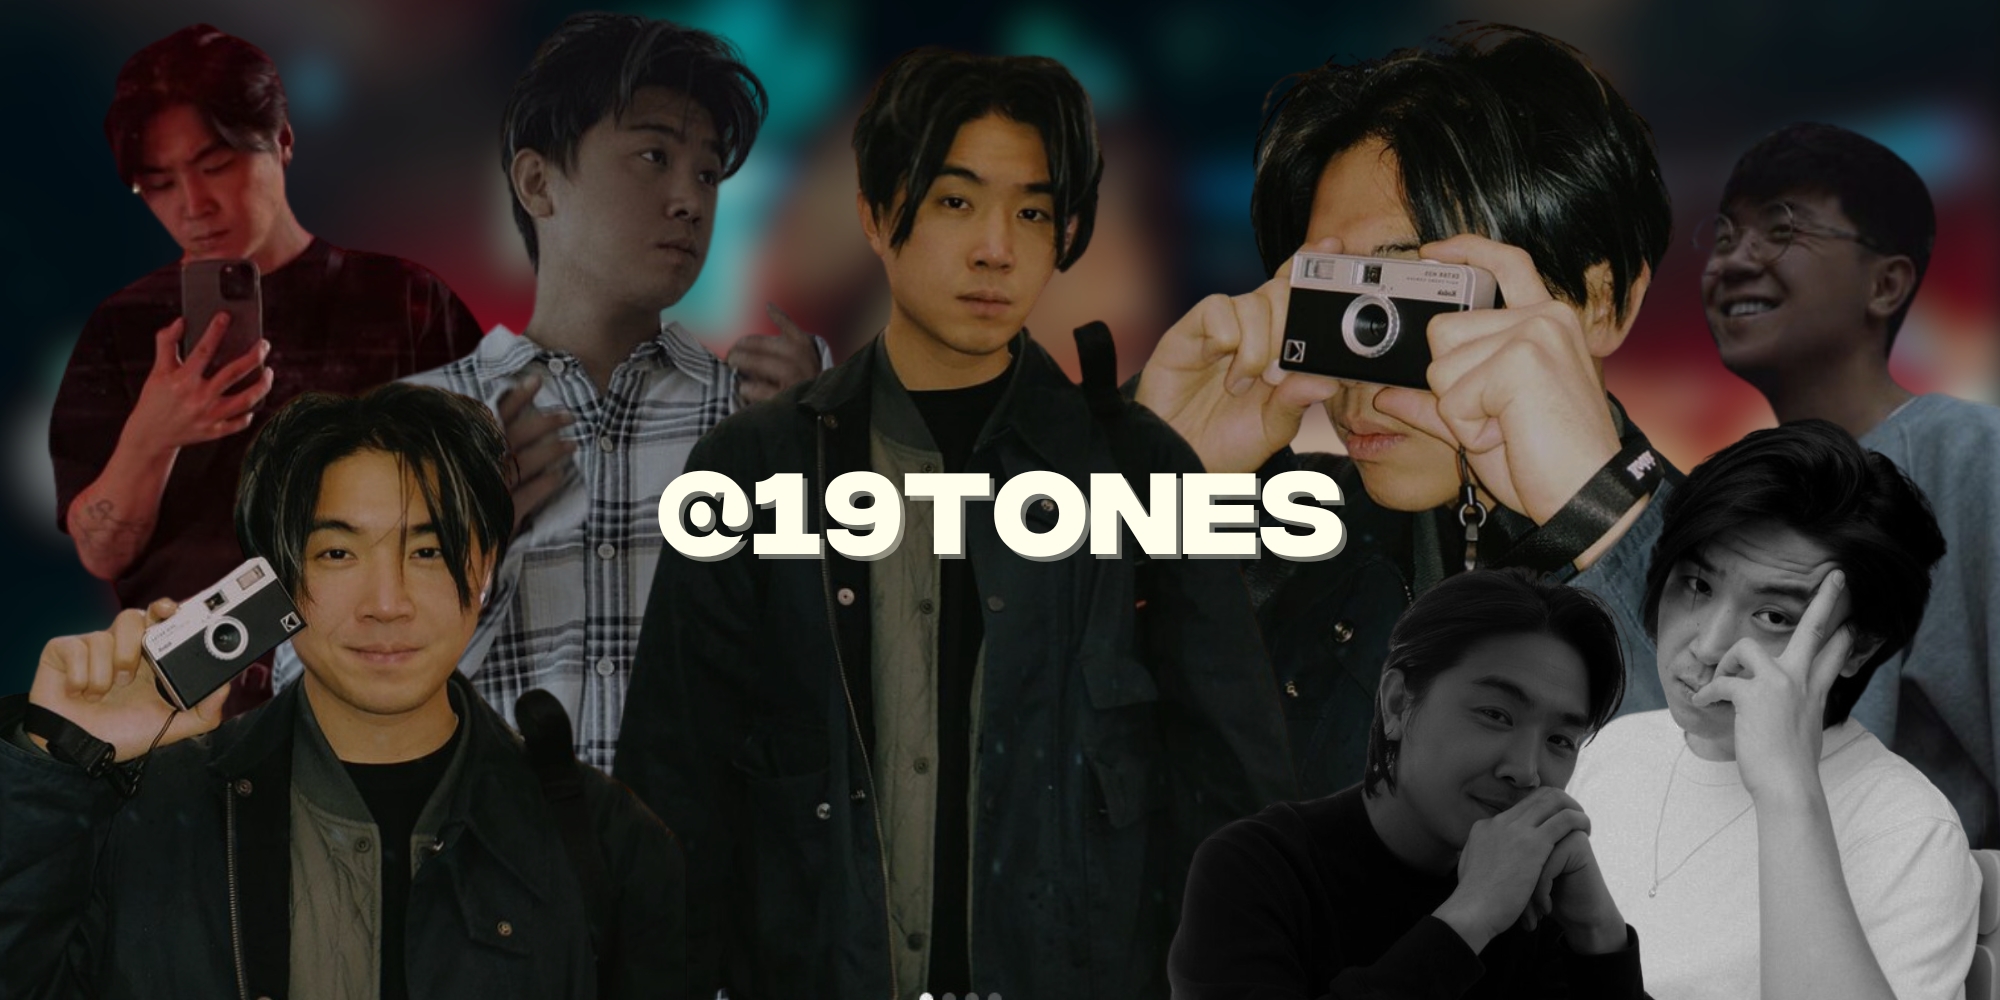 Influencer Sessions: Get To Know @19tones